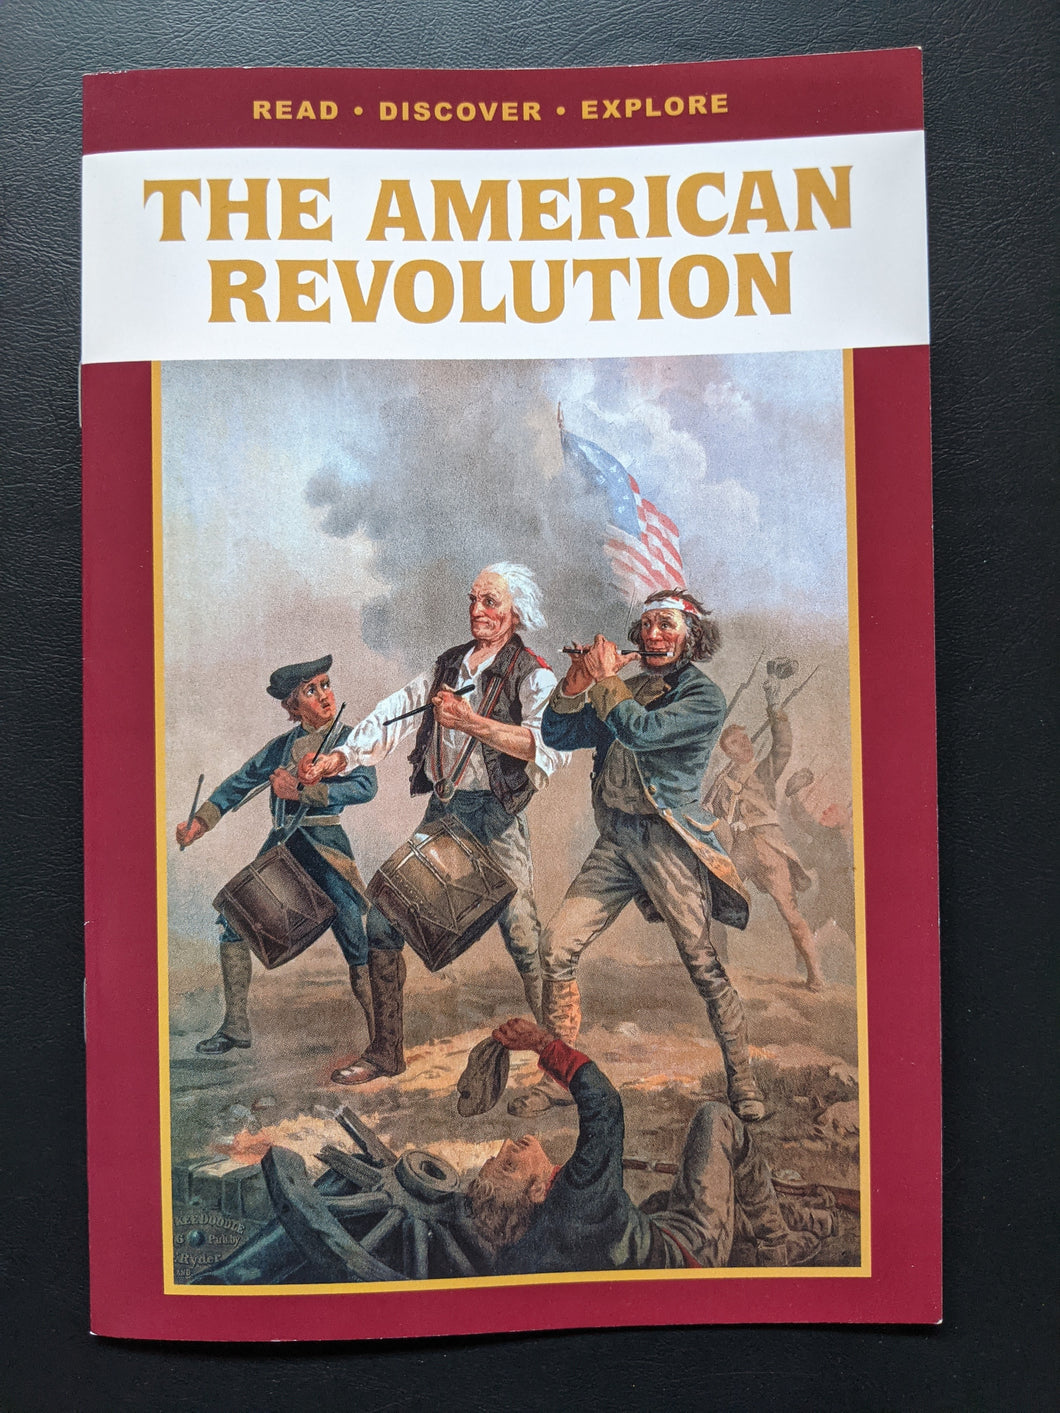 The American Revolution by Russell P. Smith